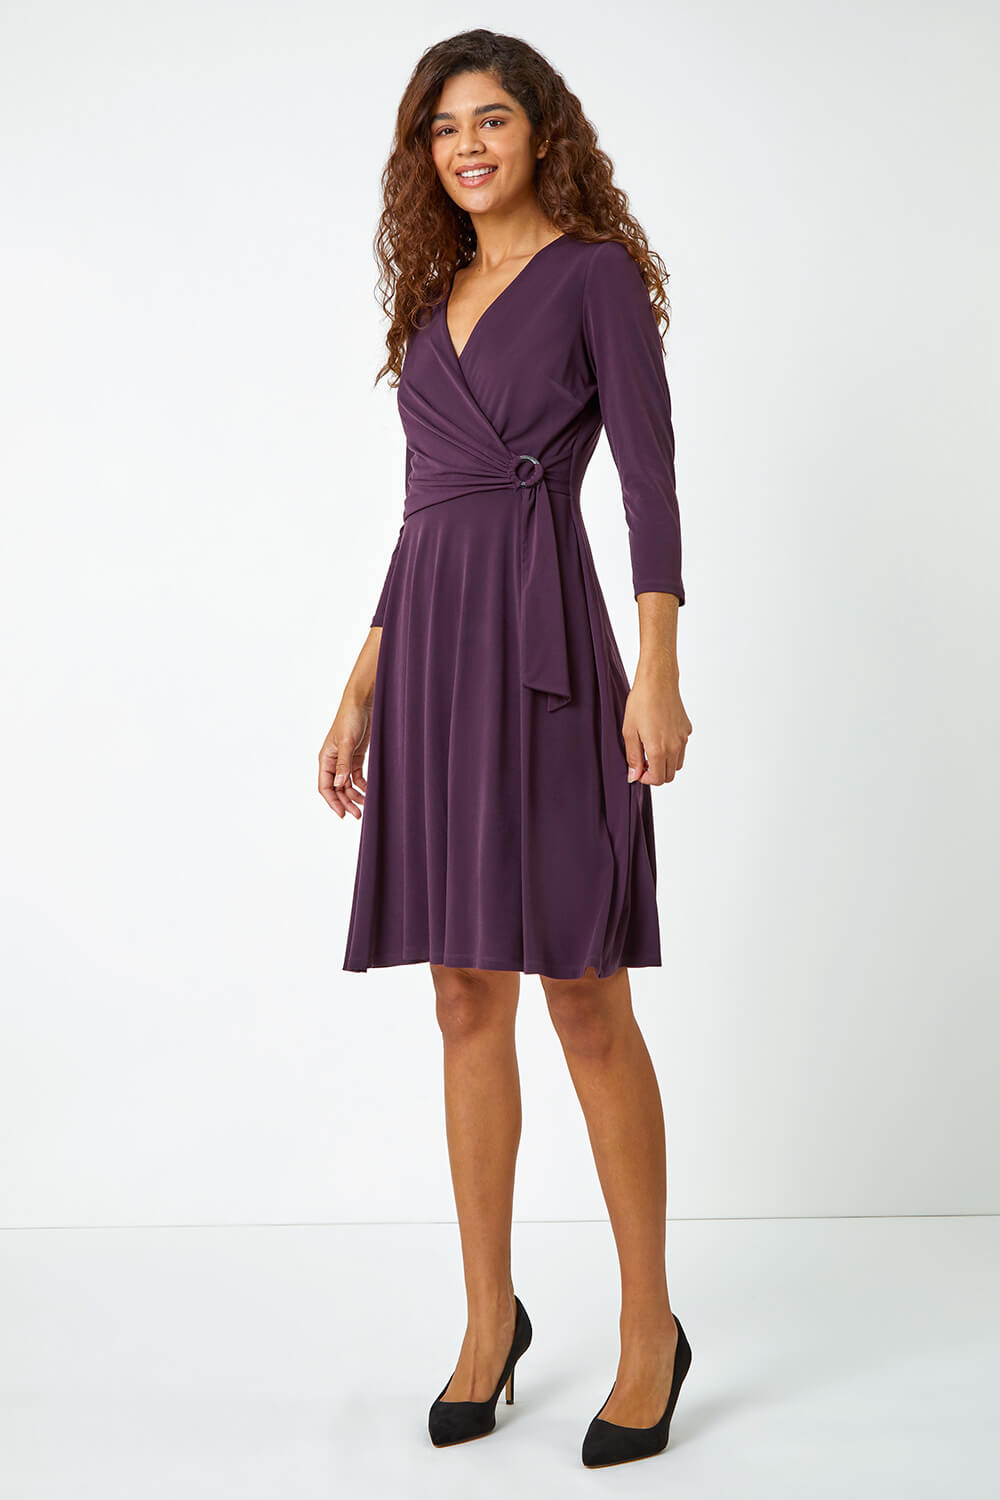 Aubergine Ring Buckle Wrap Stretch Dress, Image 2 of 5